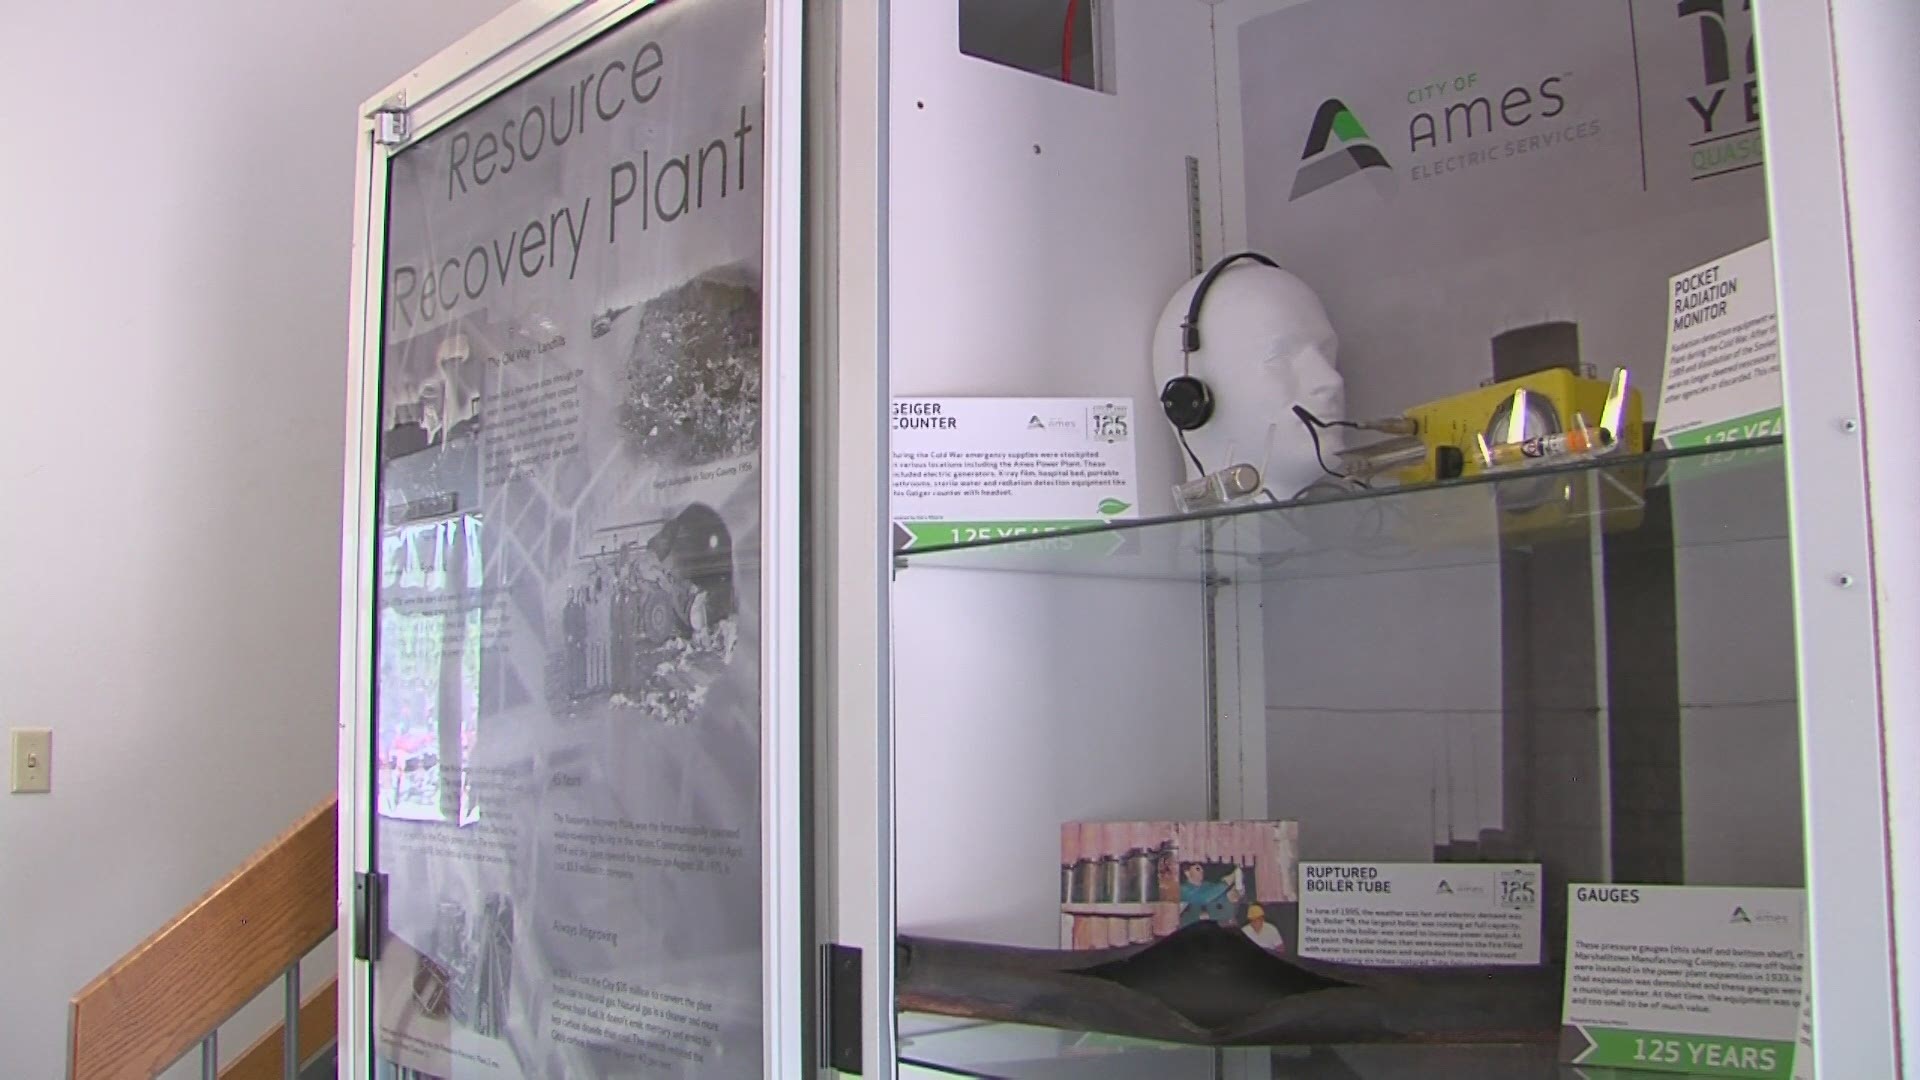 Ames Electric Services and the Ames History Museum worked together to create a new exhibit to celebrate.